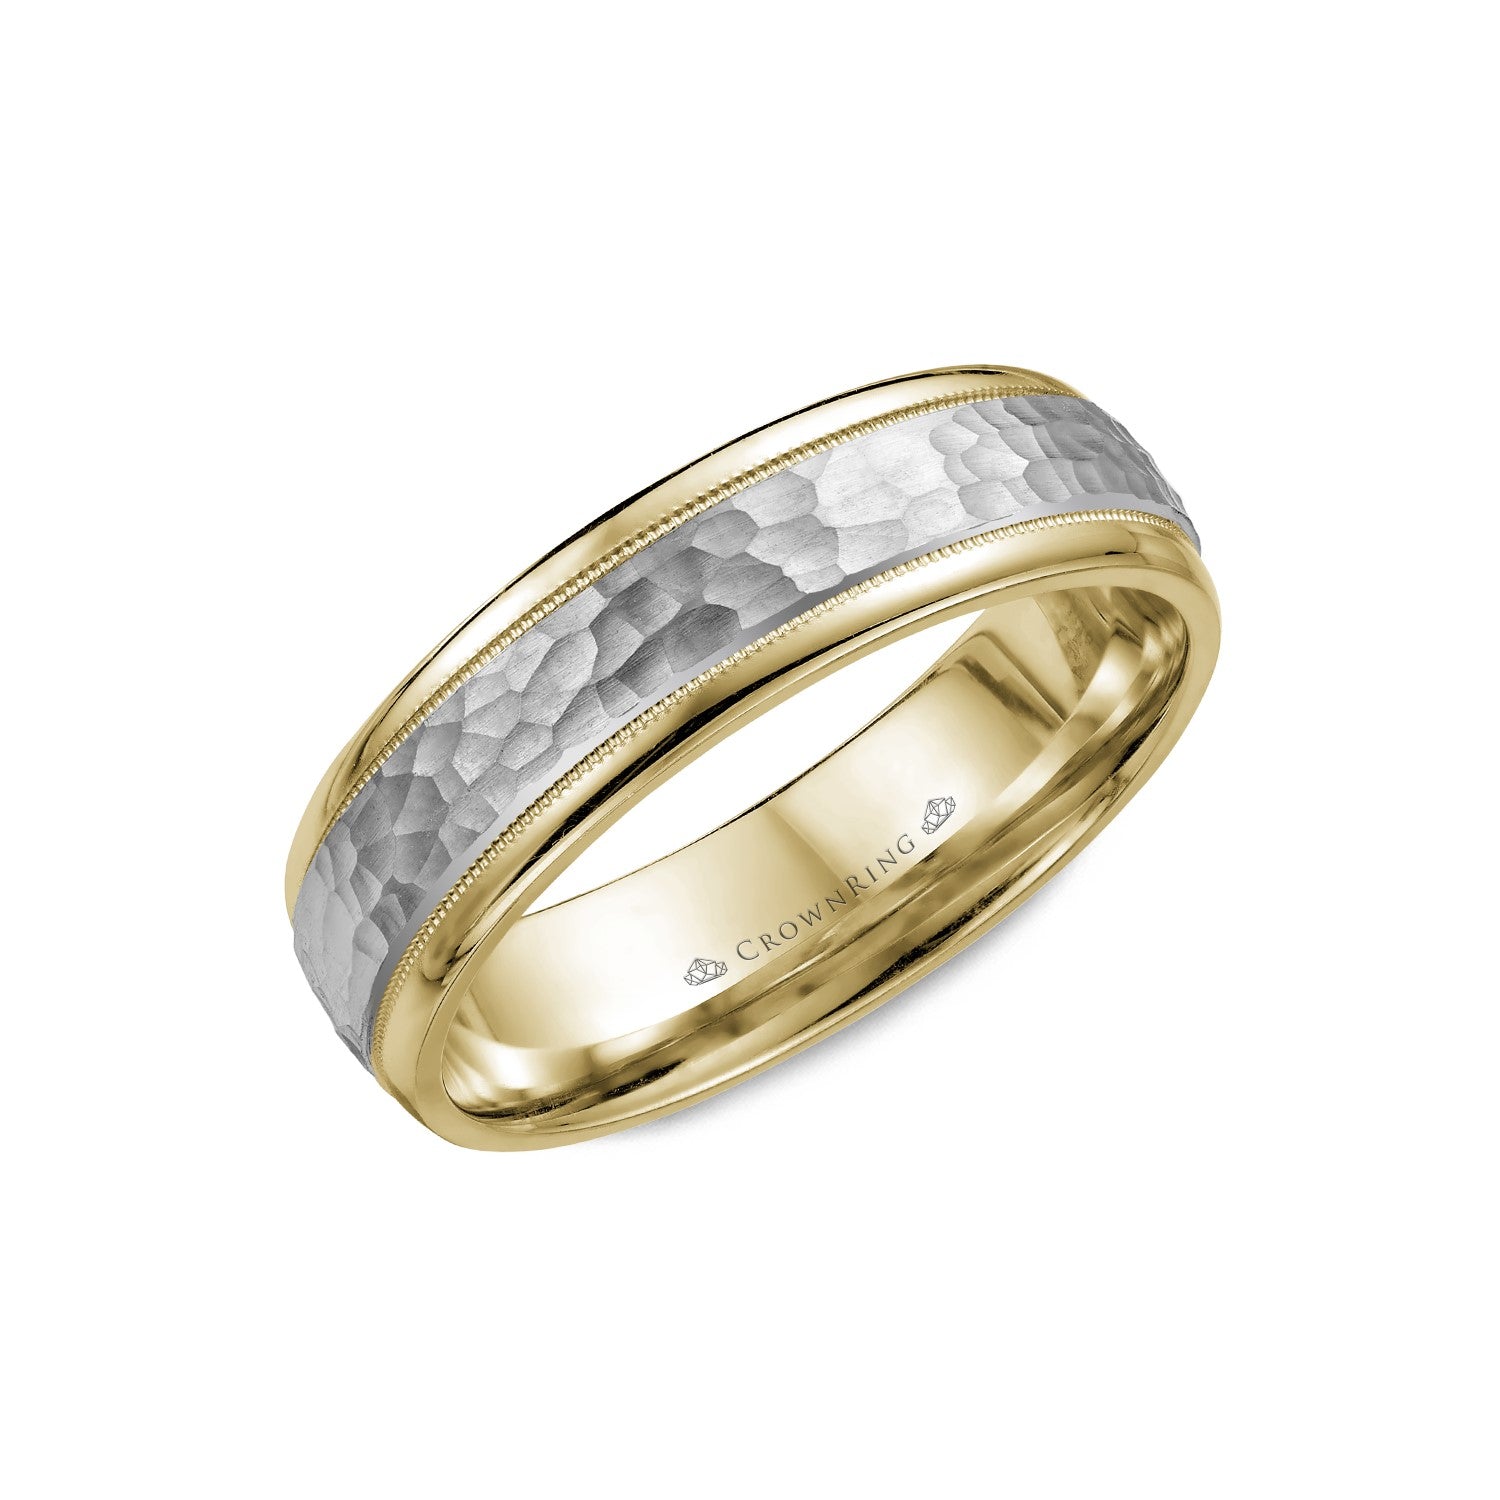 6mm Classic Wedding Band Frosted Hammered Center & High Polish Edges